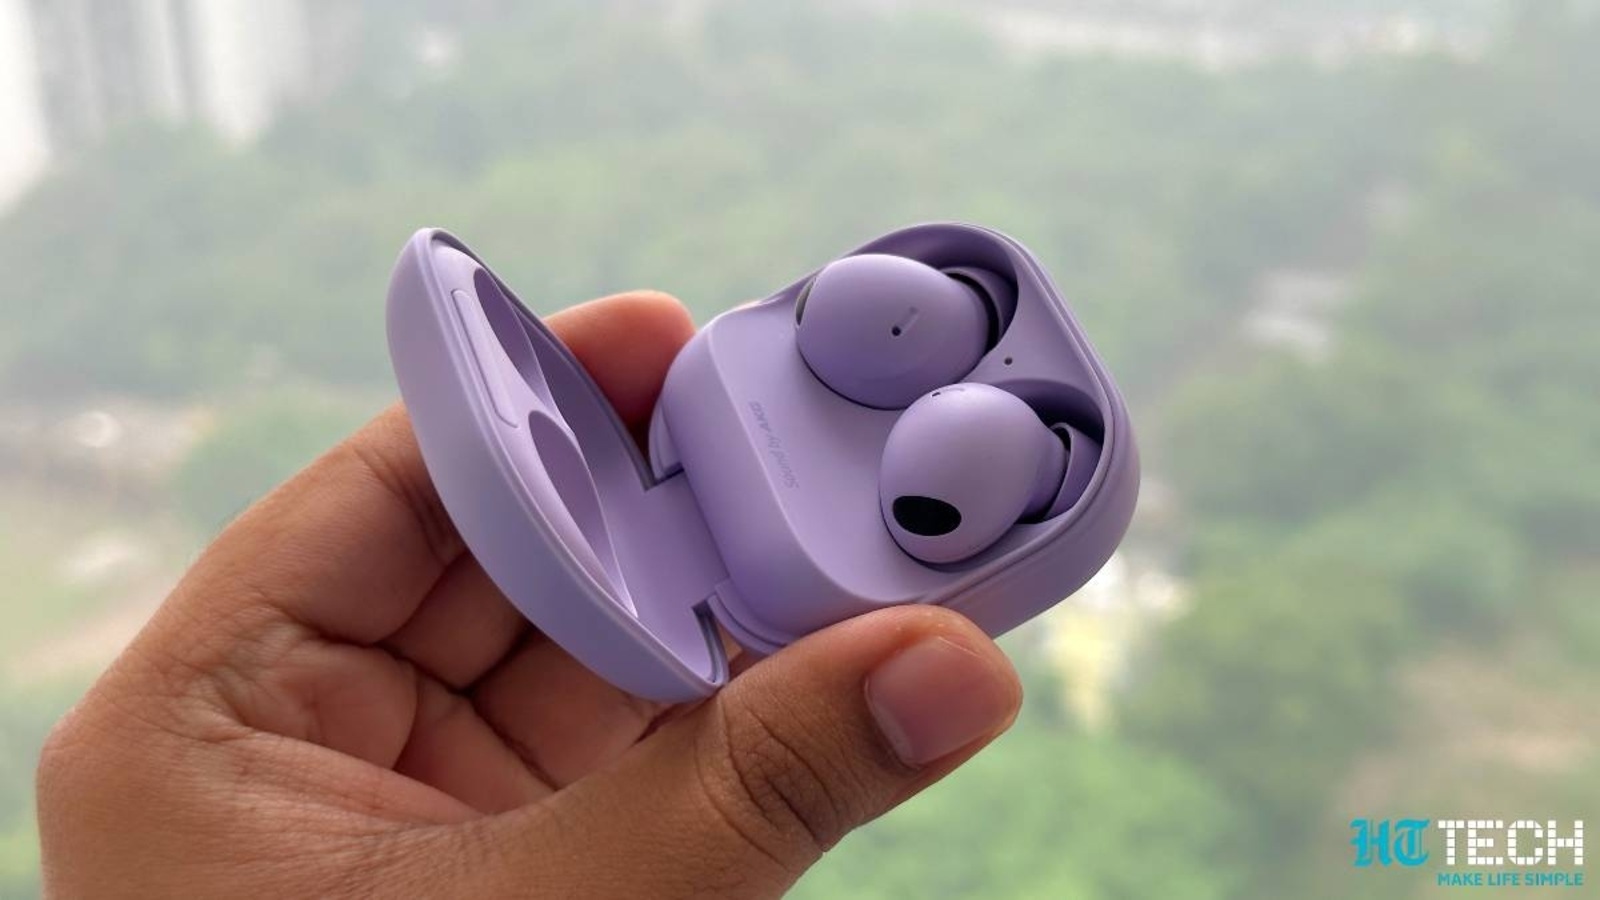 Samsung Galaxy Buds FE with water-resistant design, active noise  cancellation launched in India: Price and more - Times of India